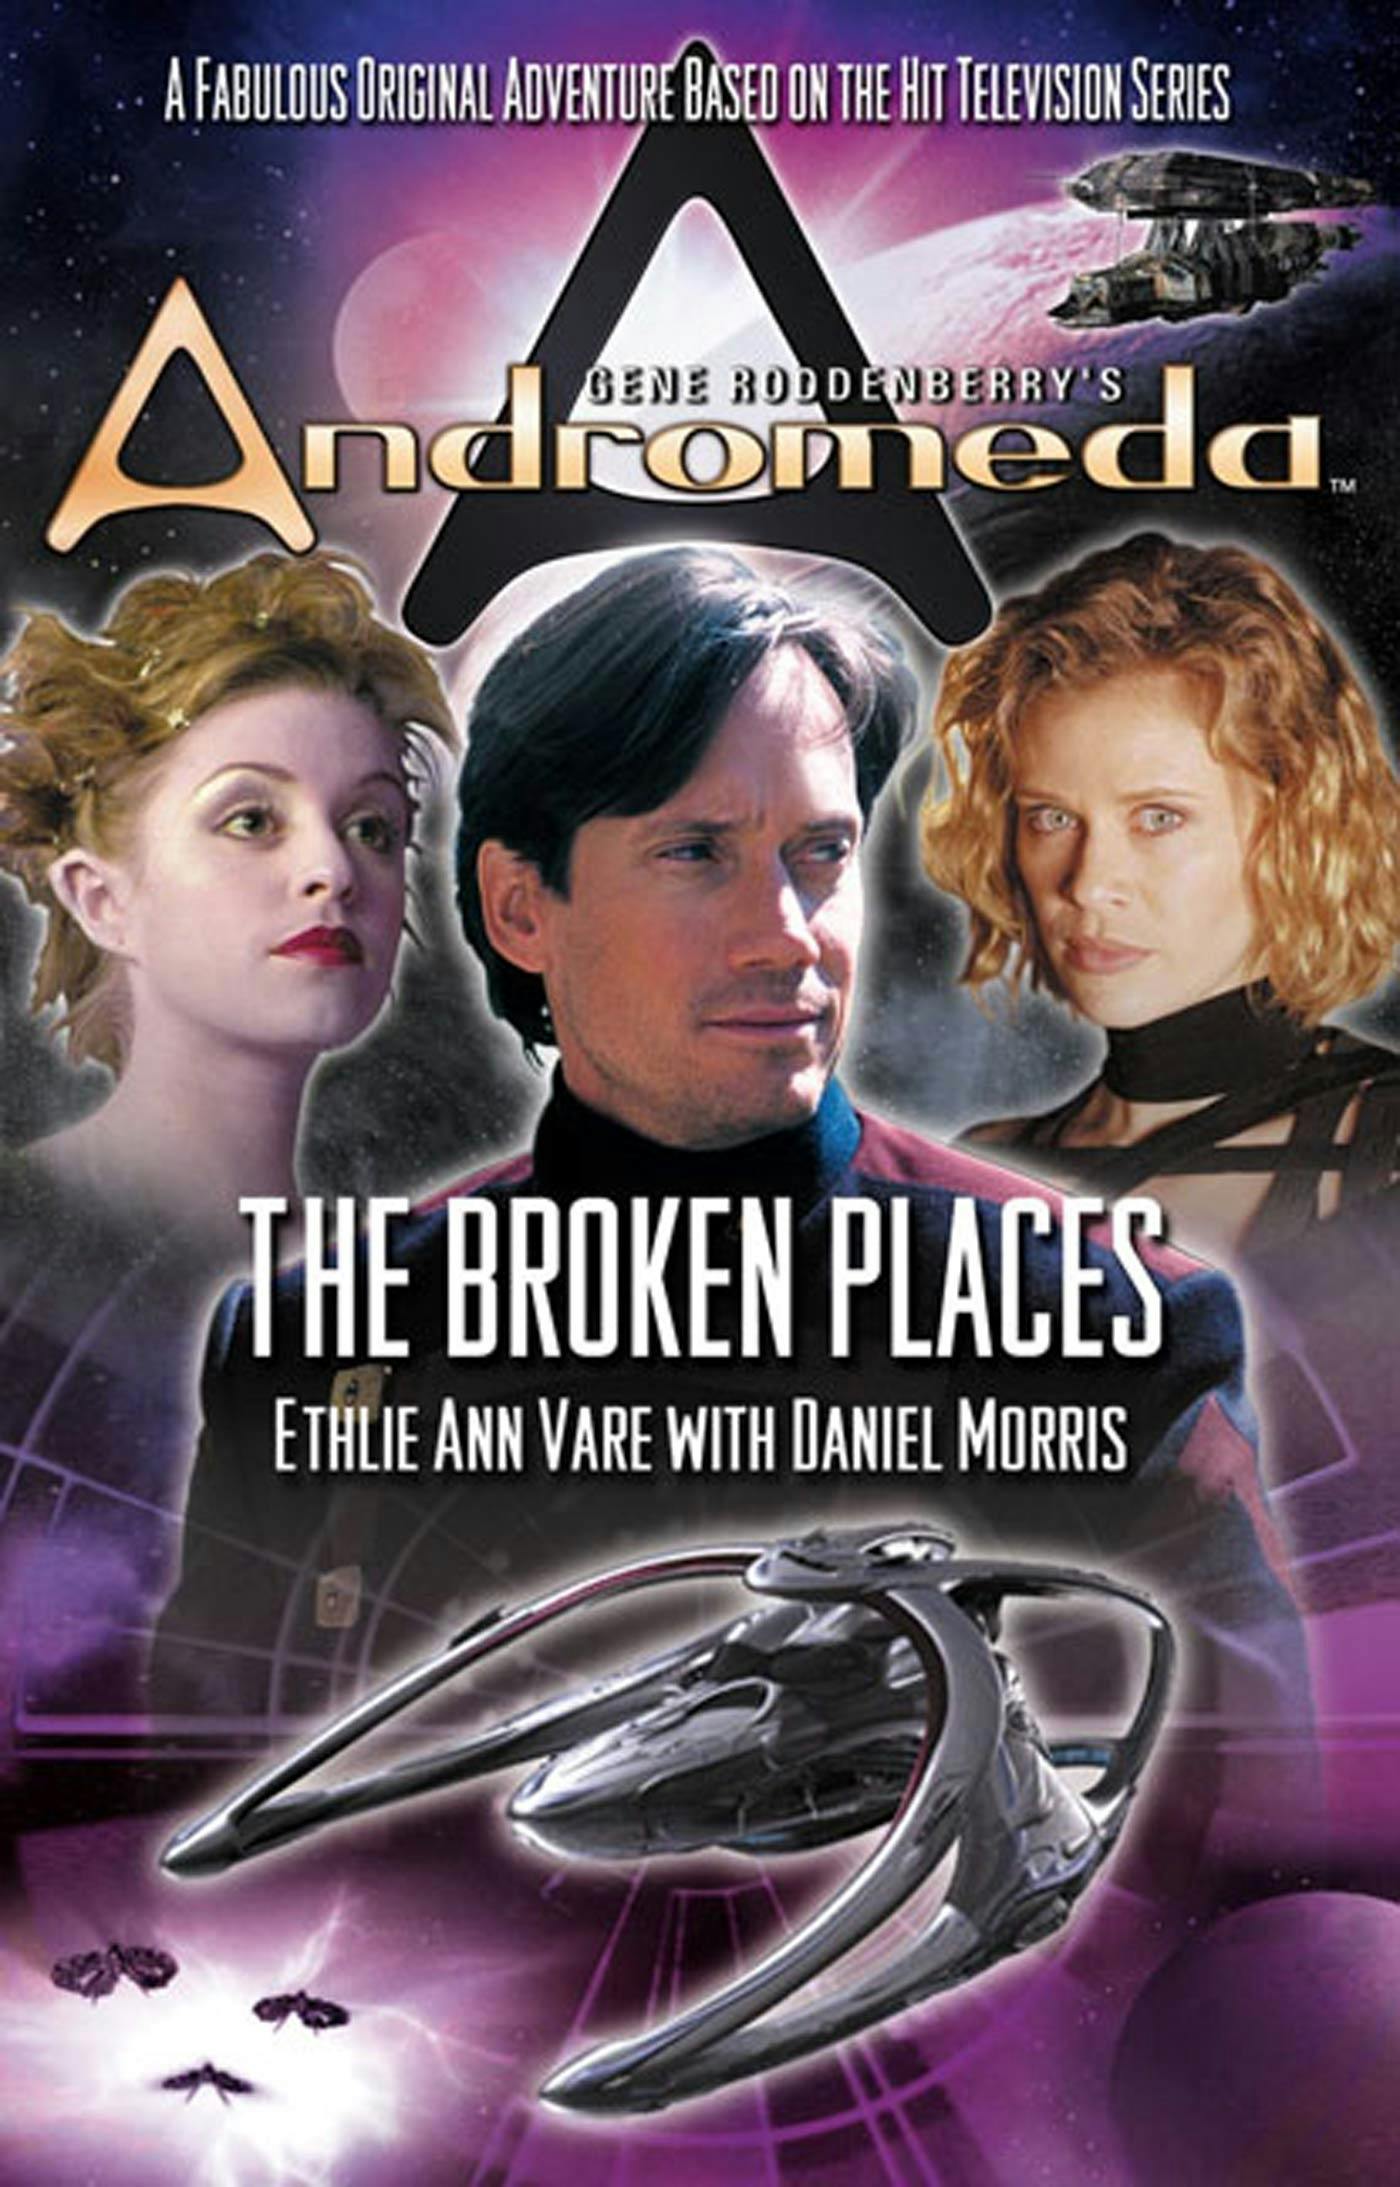 Cover for the book titled as: Gene Roddenberry's Andromeda: The Broken Places